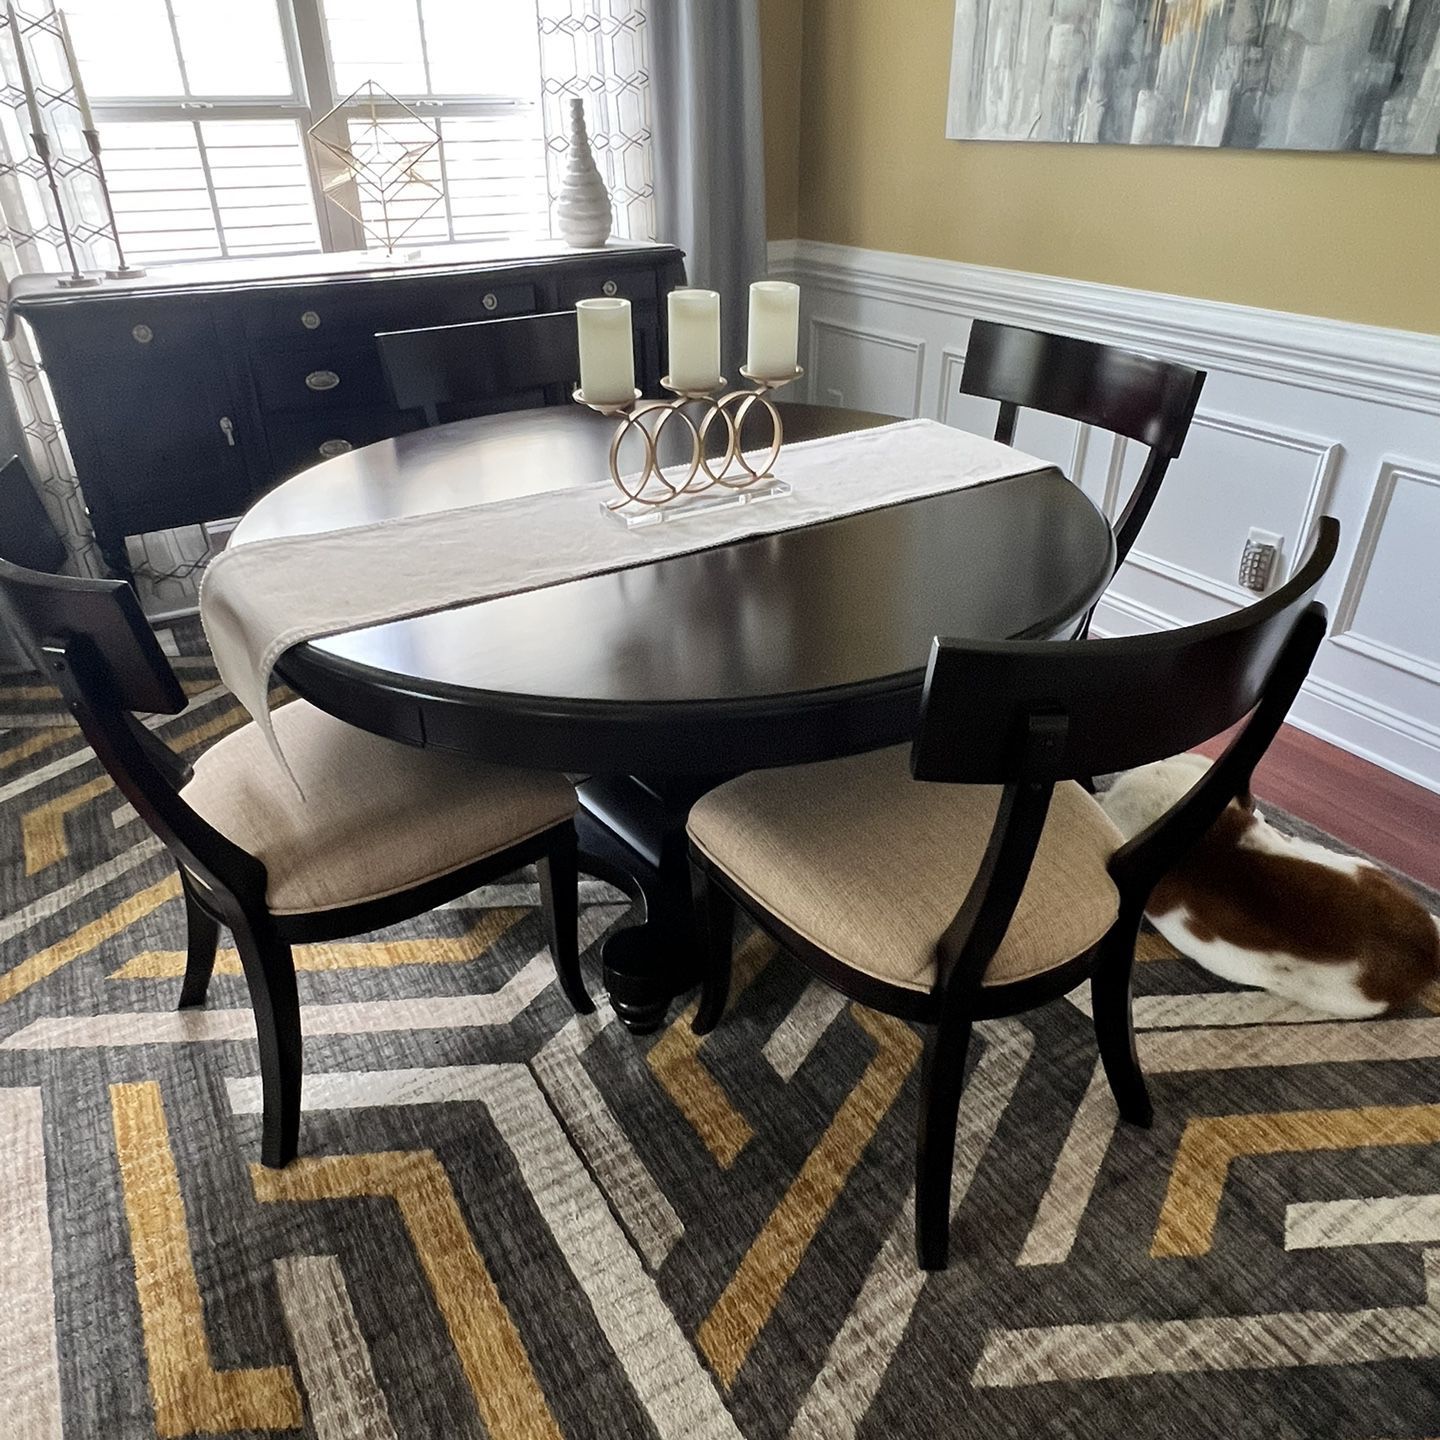 Dining Room Set with 4 Chairs